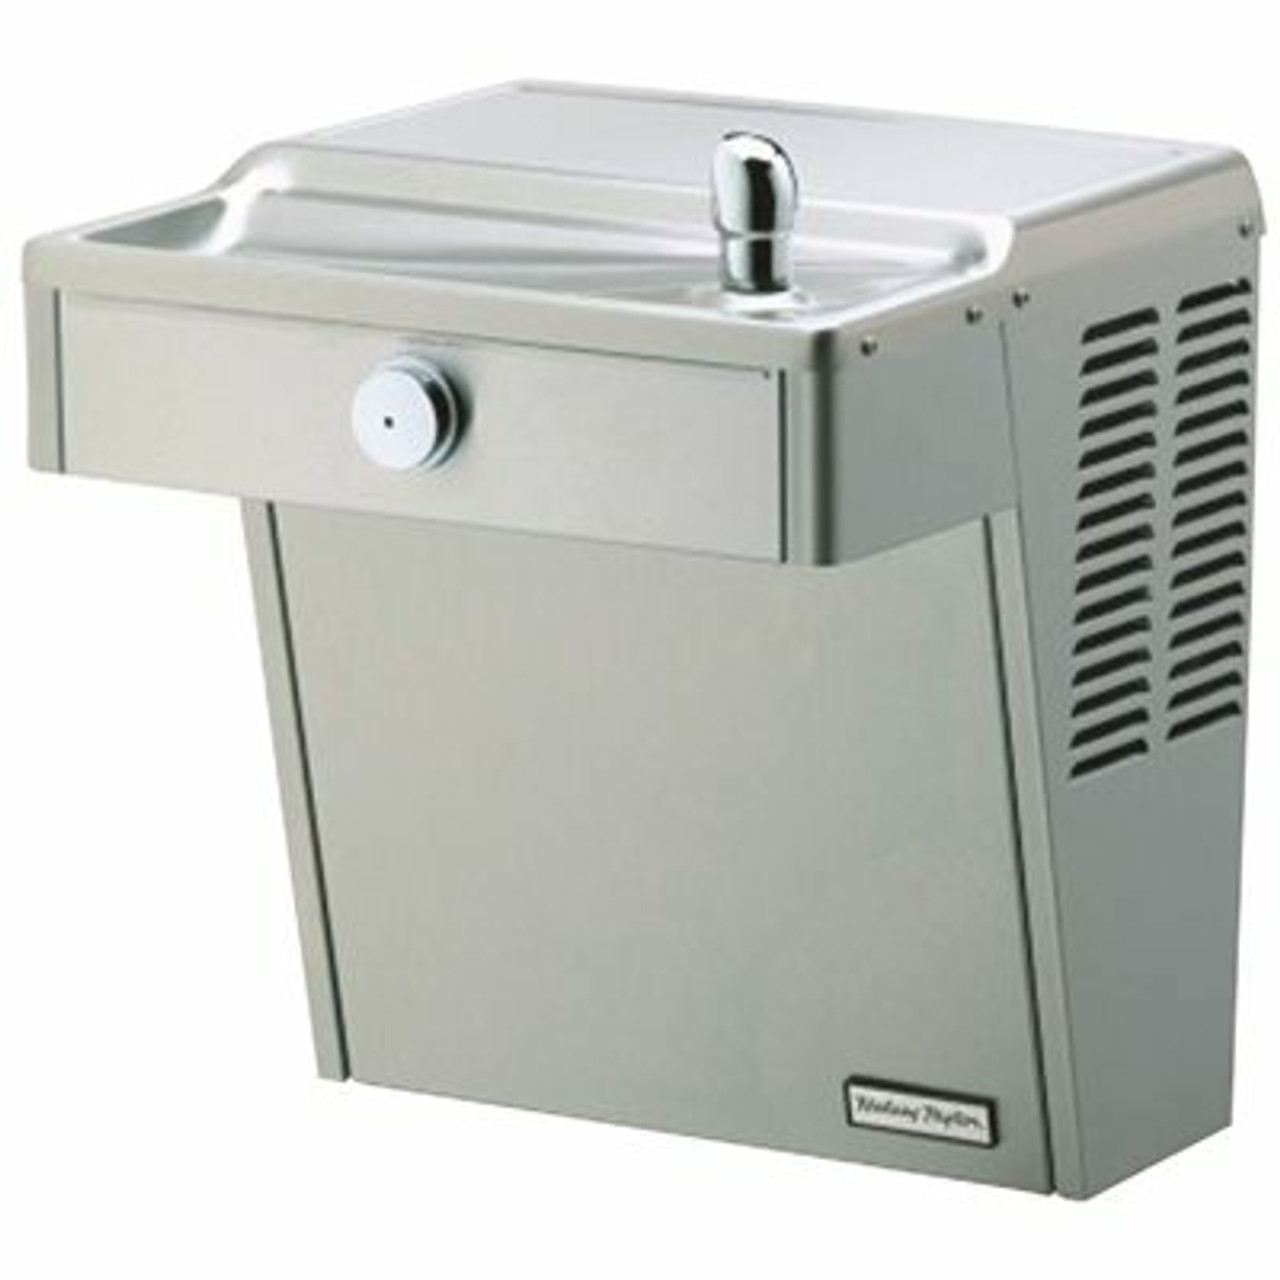 Halsey Taylor Vandal Resistant Drinking Fountain